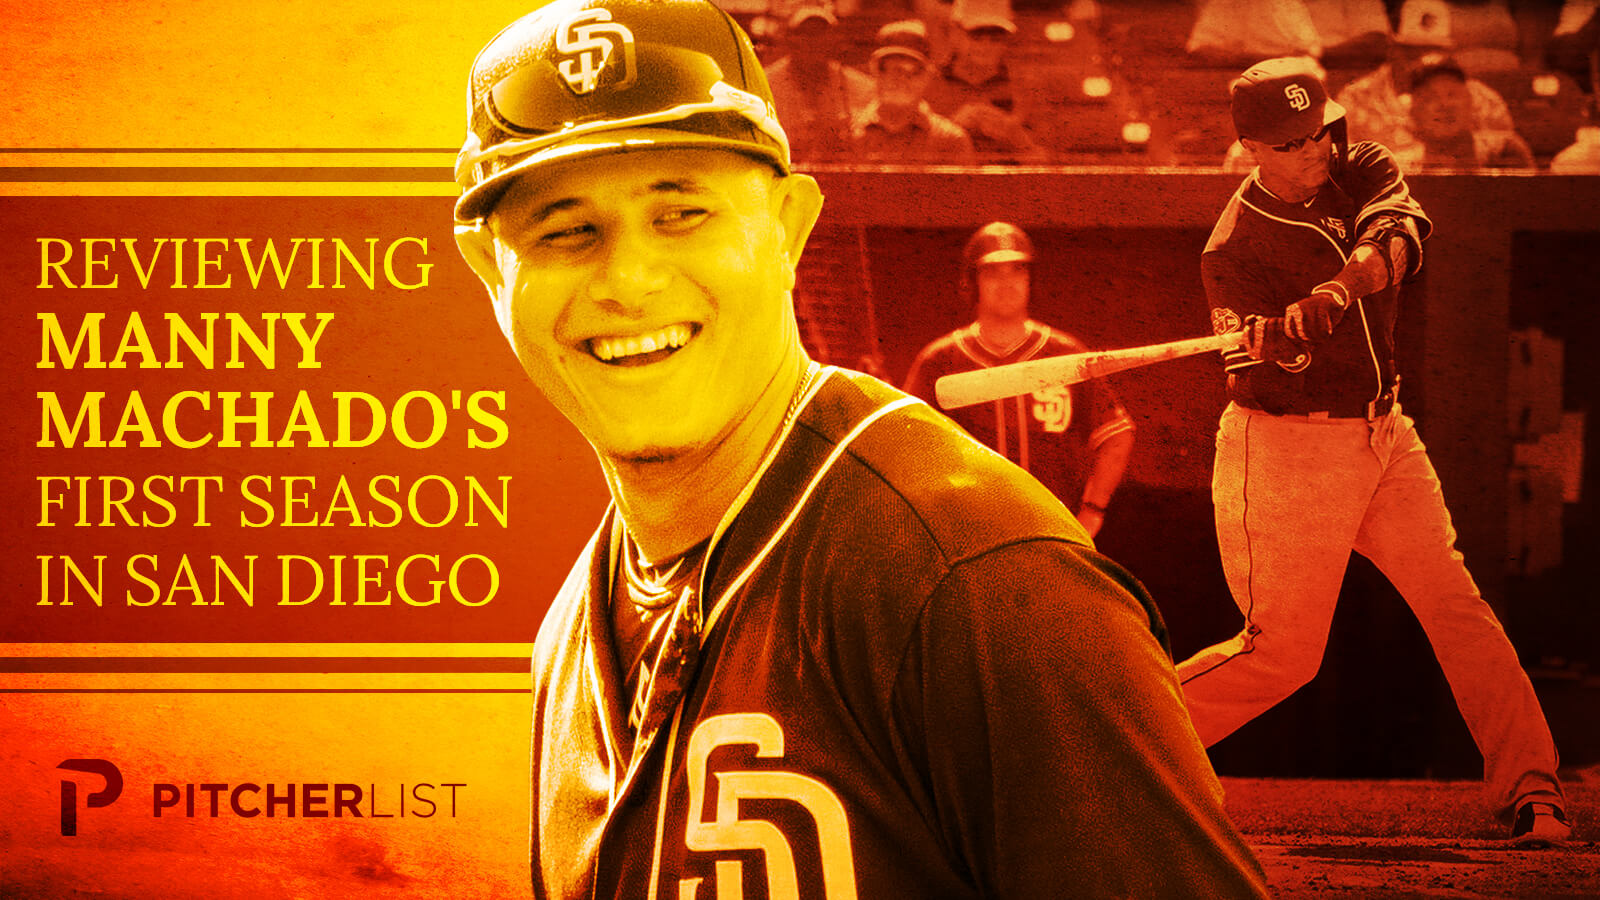 Reviewing Manny Machado's First Season in San Diego